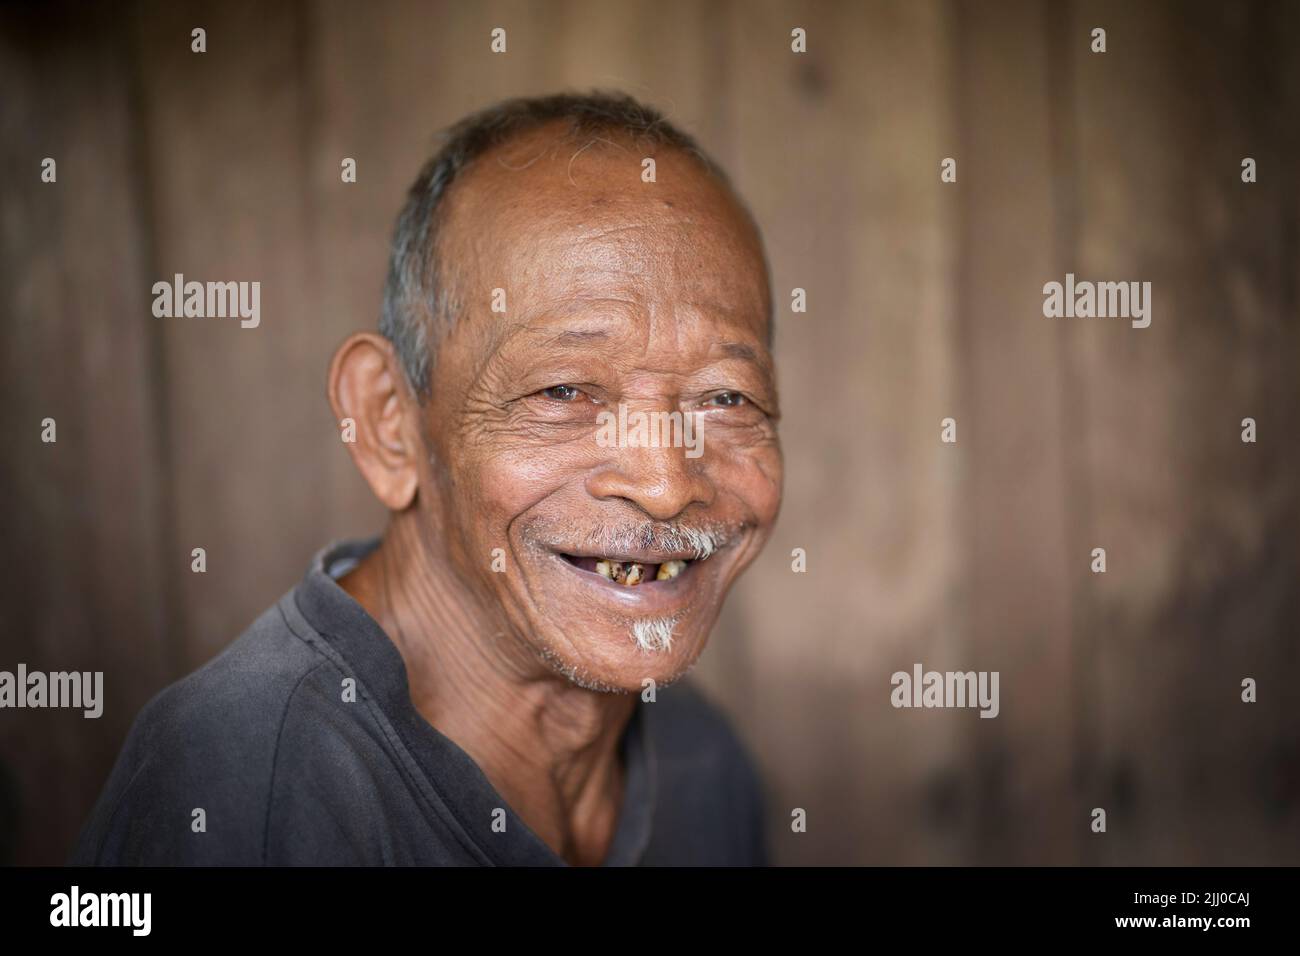 Portrait of an old man with vignette effect. Blurred background Stock Photo